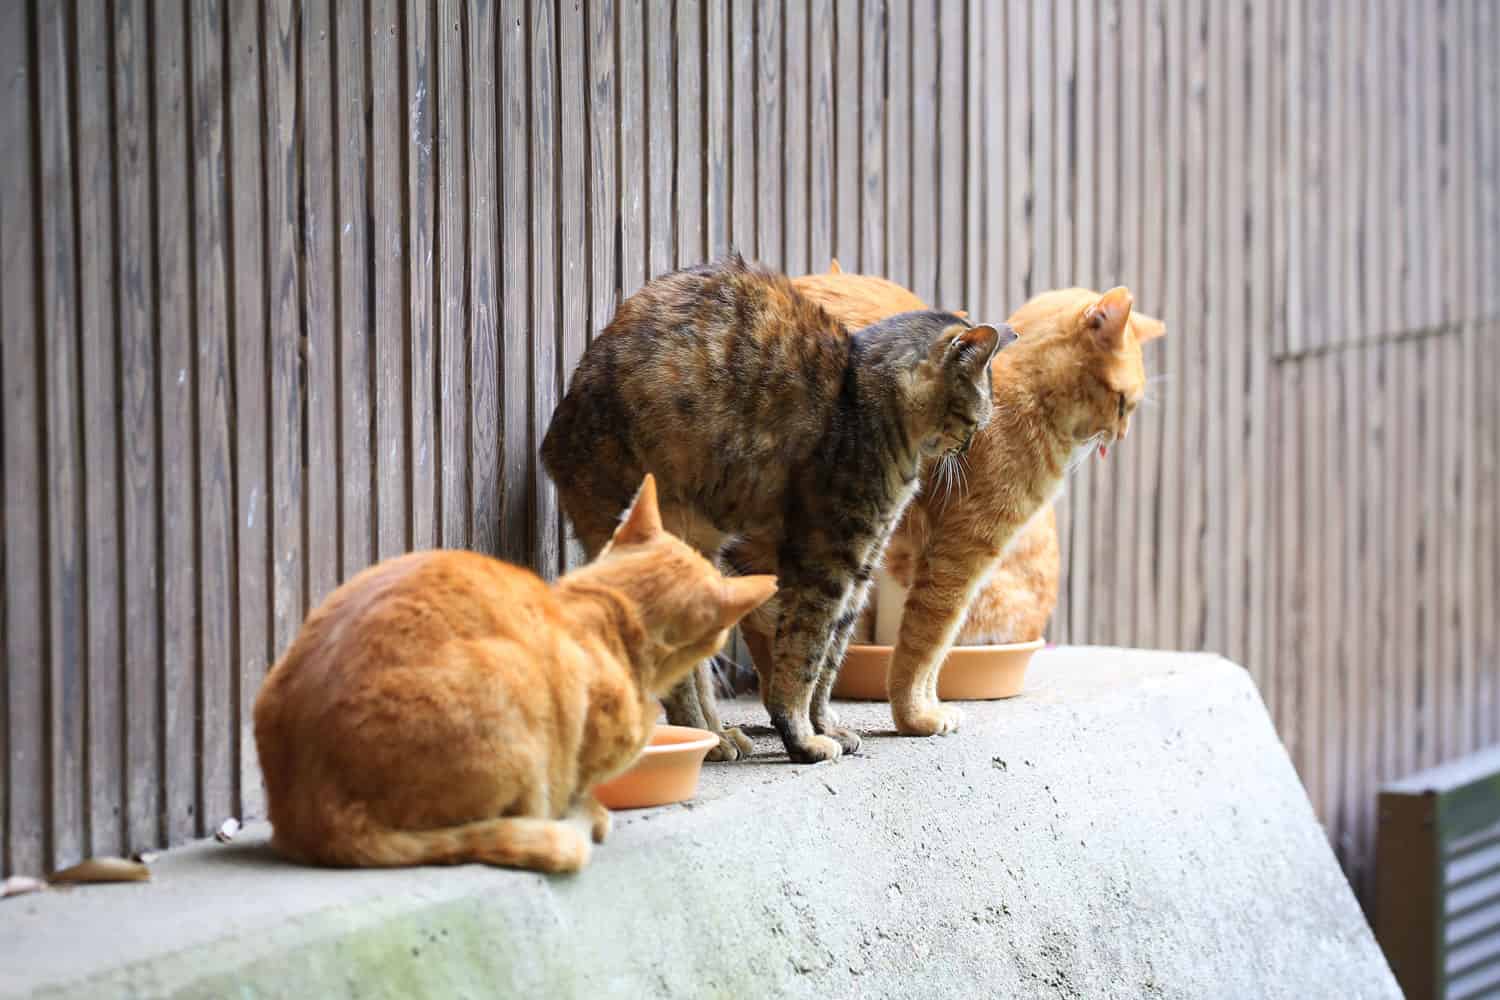 Group of stray-feral cats stretching in Park, Japan
